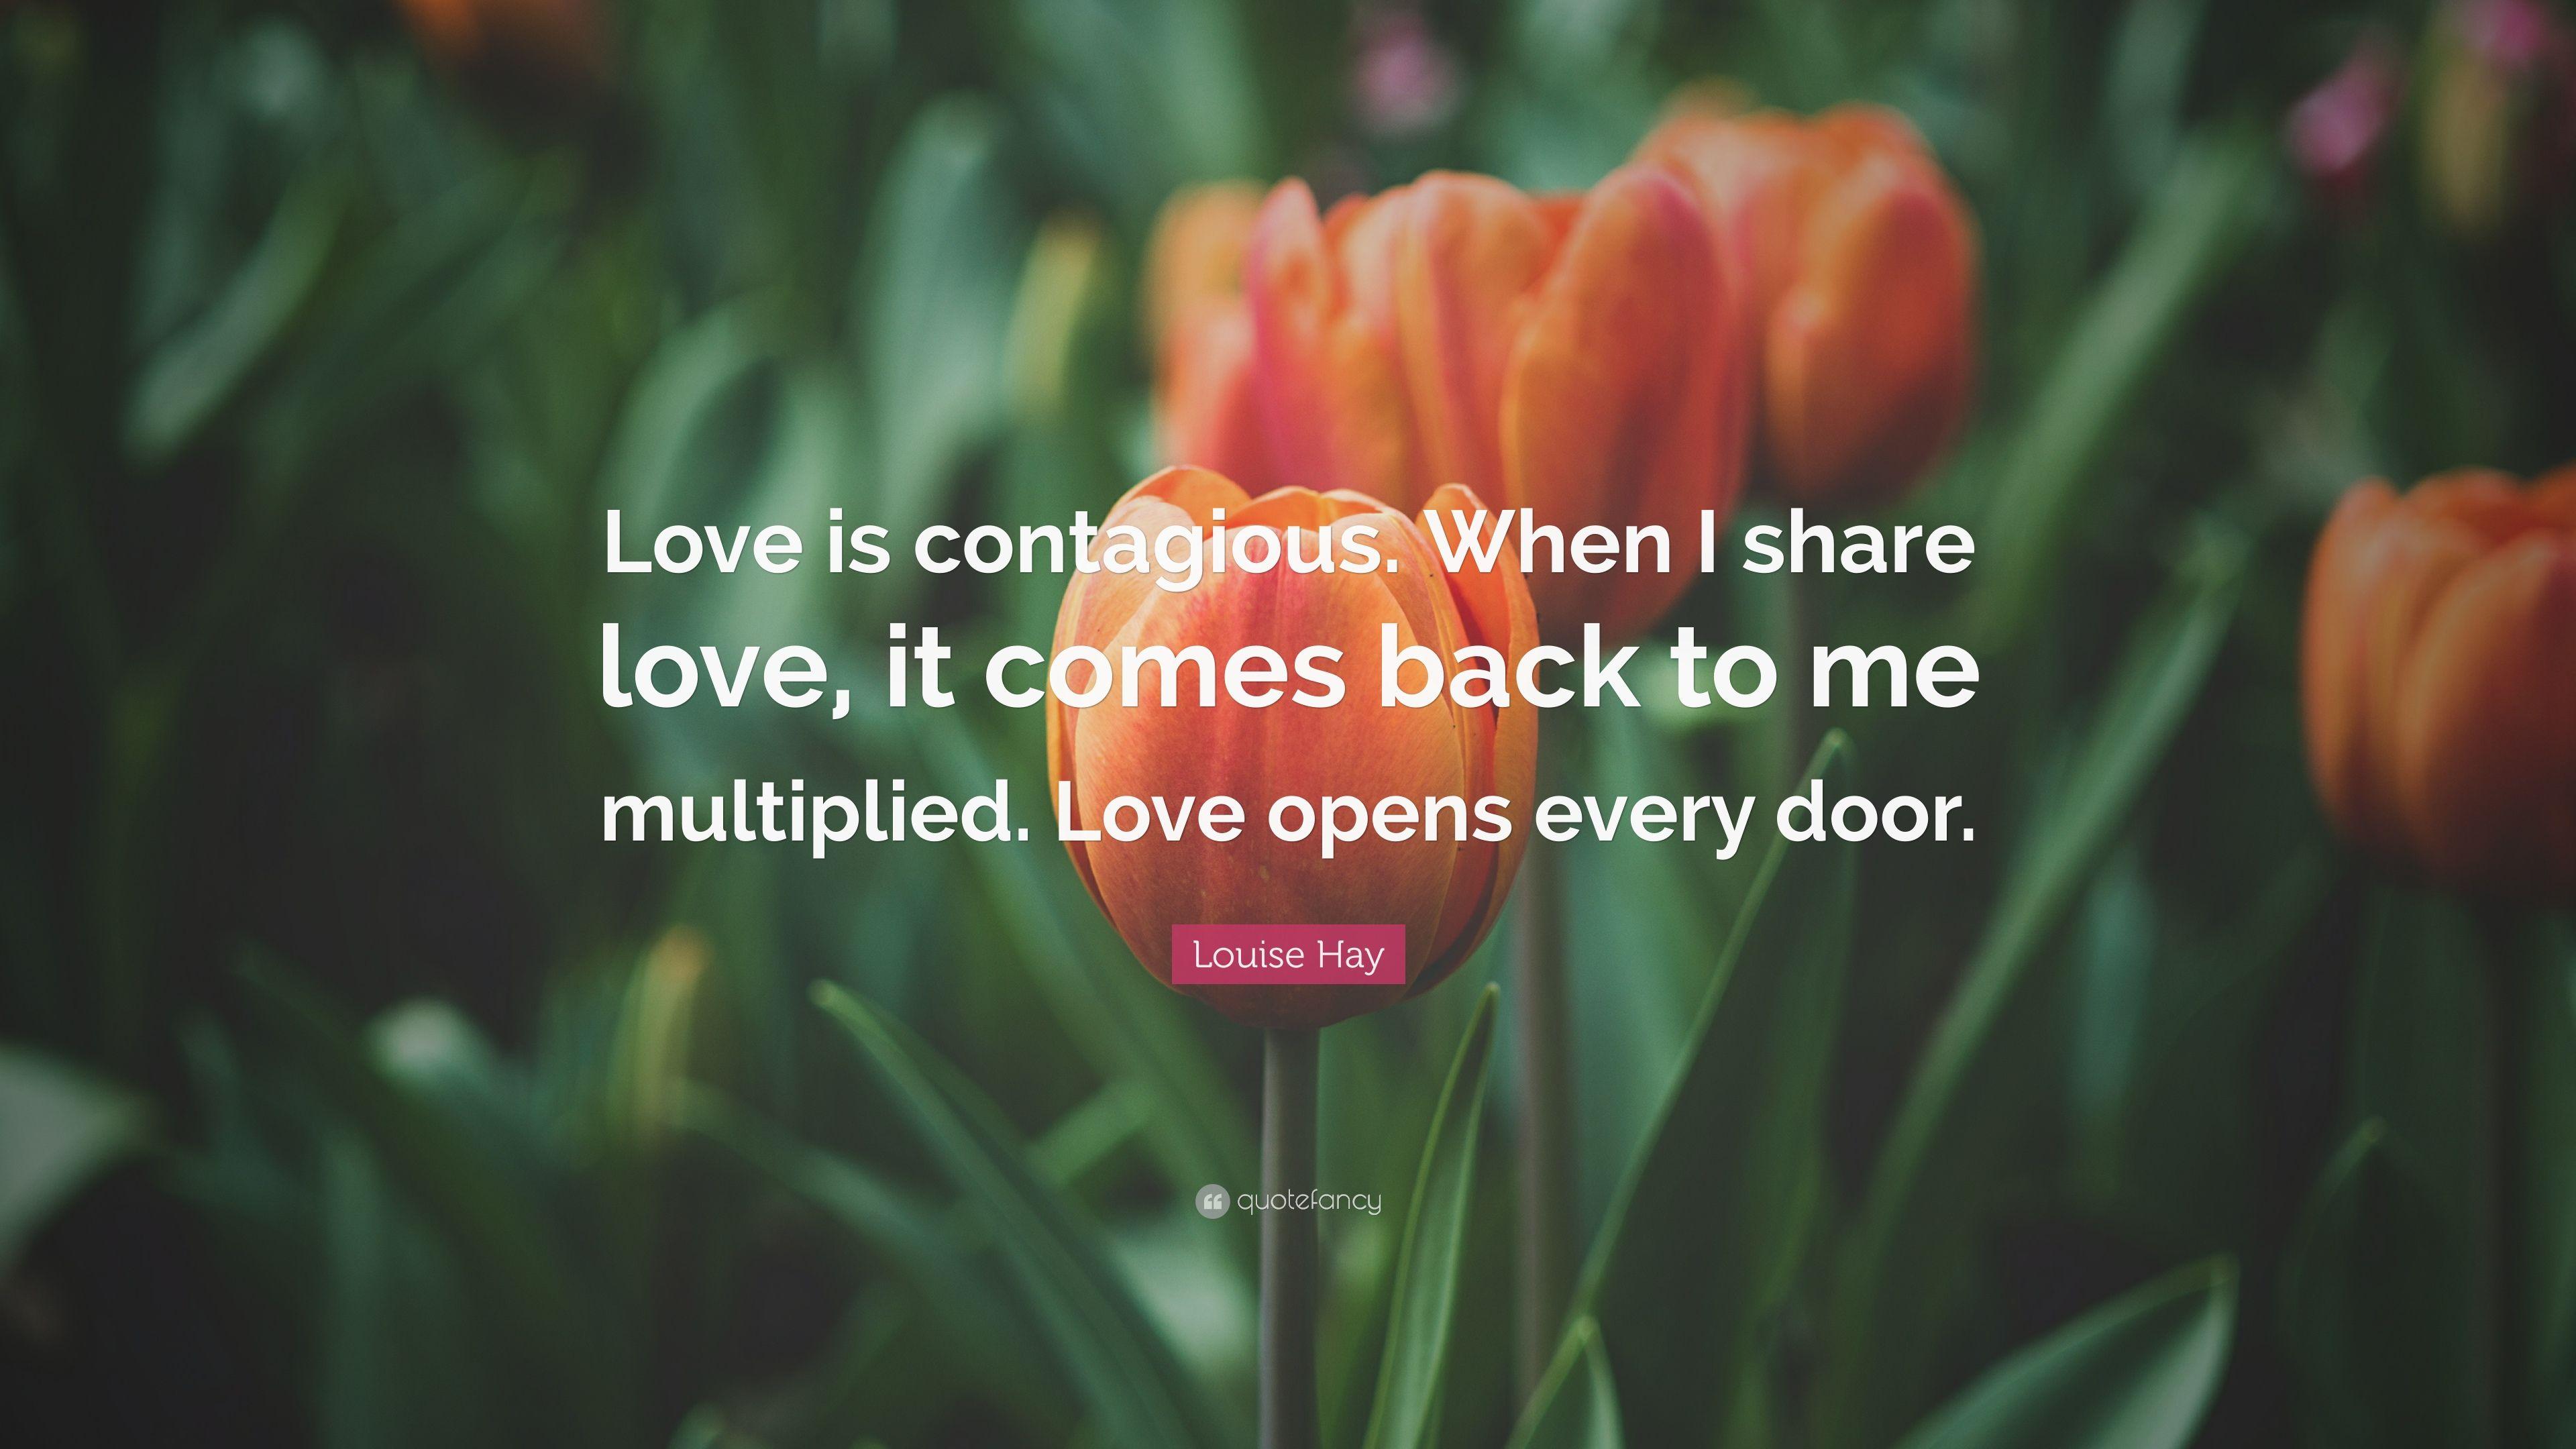 Louise Hay Quote: “Love is contagious. When I share love, it comes